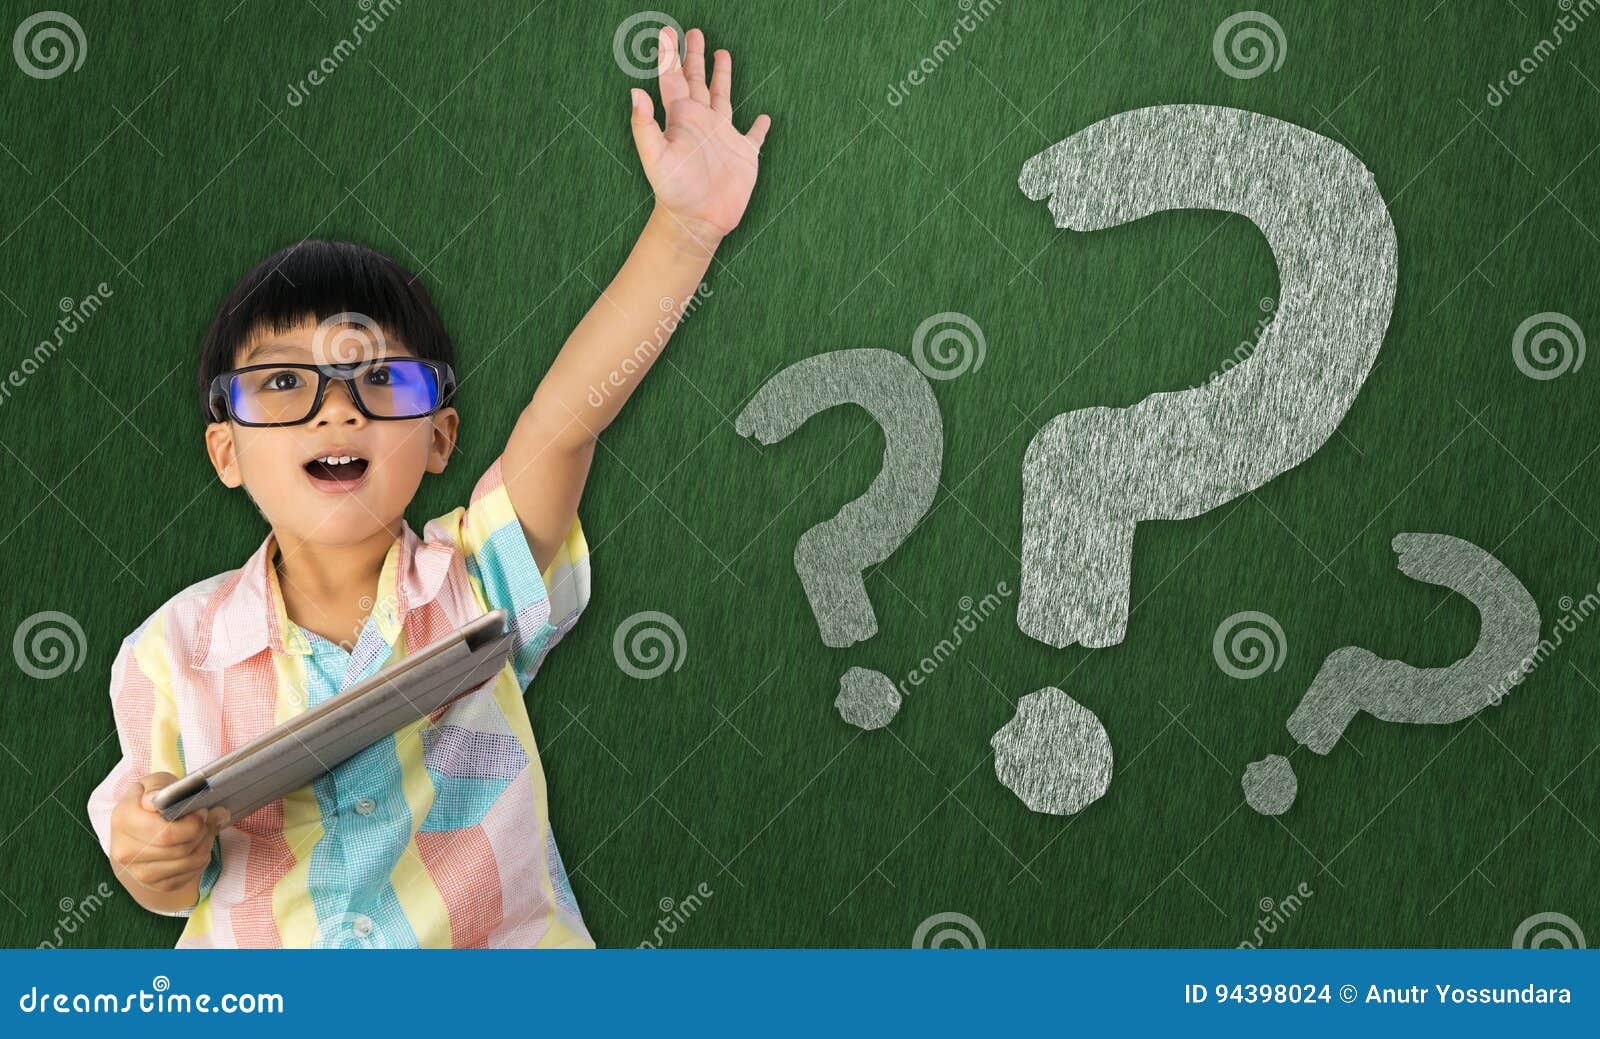 boy raise his hand to ask question